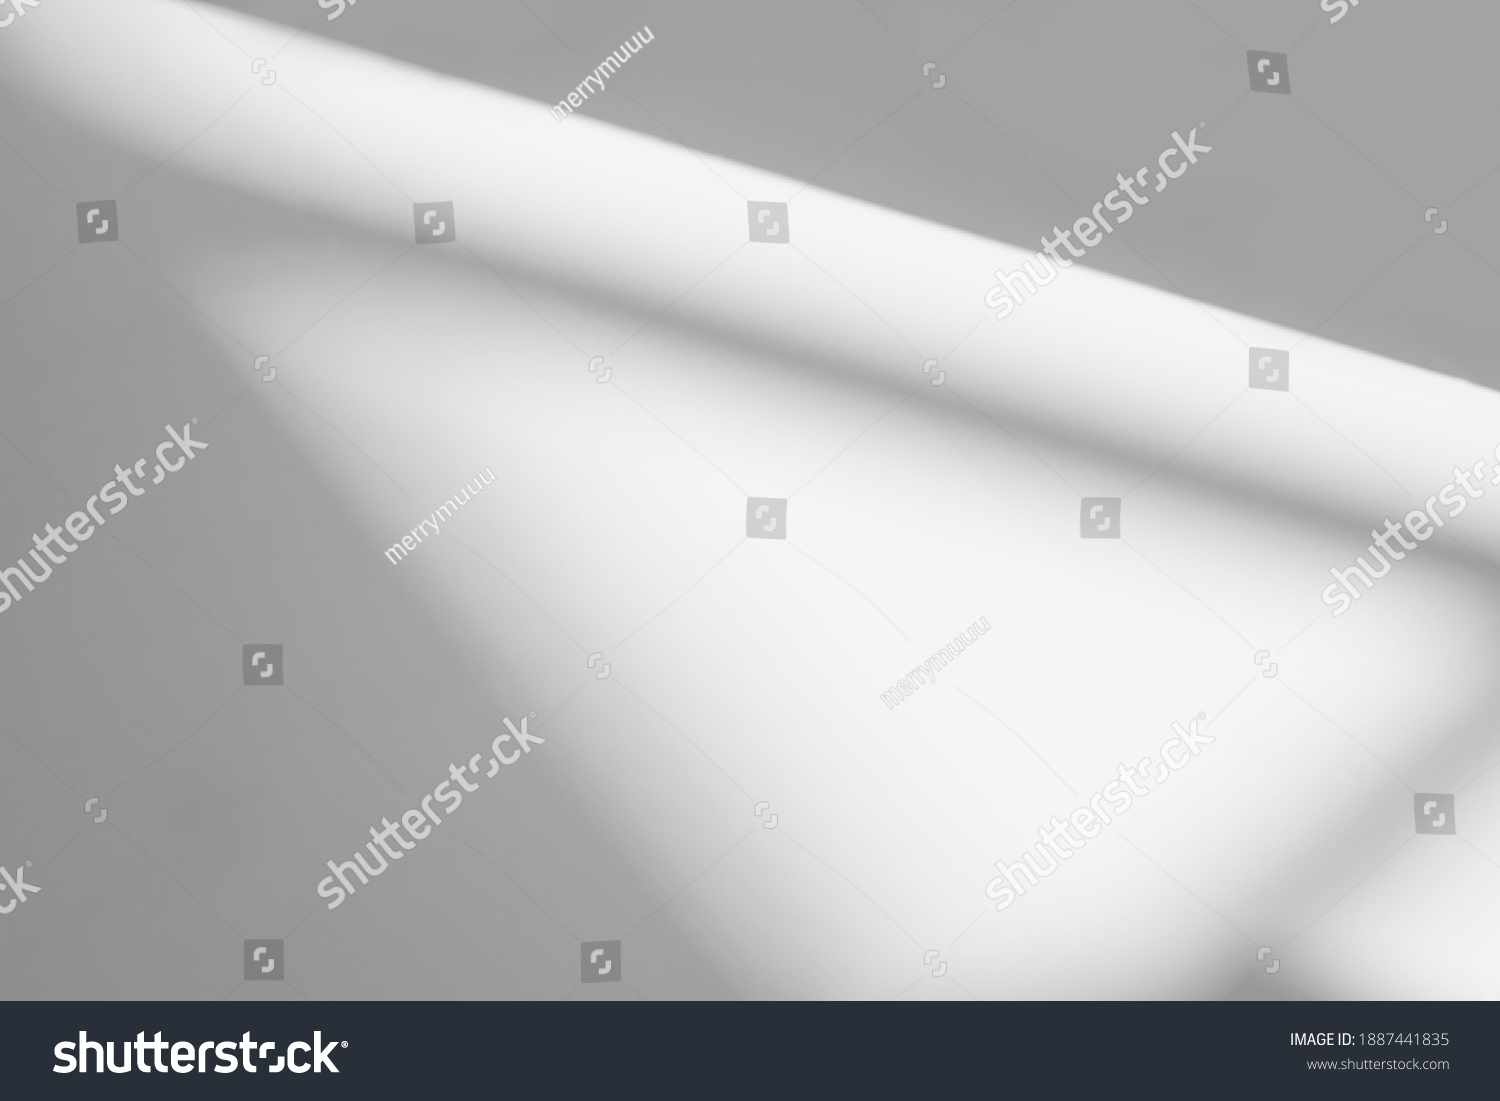 Abstract shadow and striped diagonal light background on white wall  from window,  architecture dark gray and sunshine diagonal geometric effect overlay for backdrop and mockup design
 #1887441835